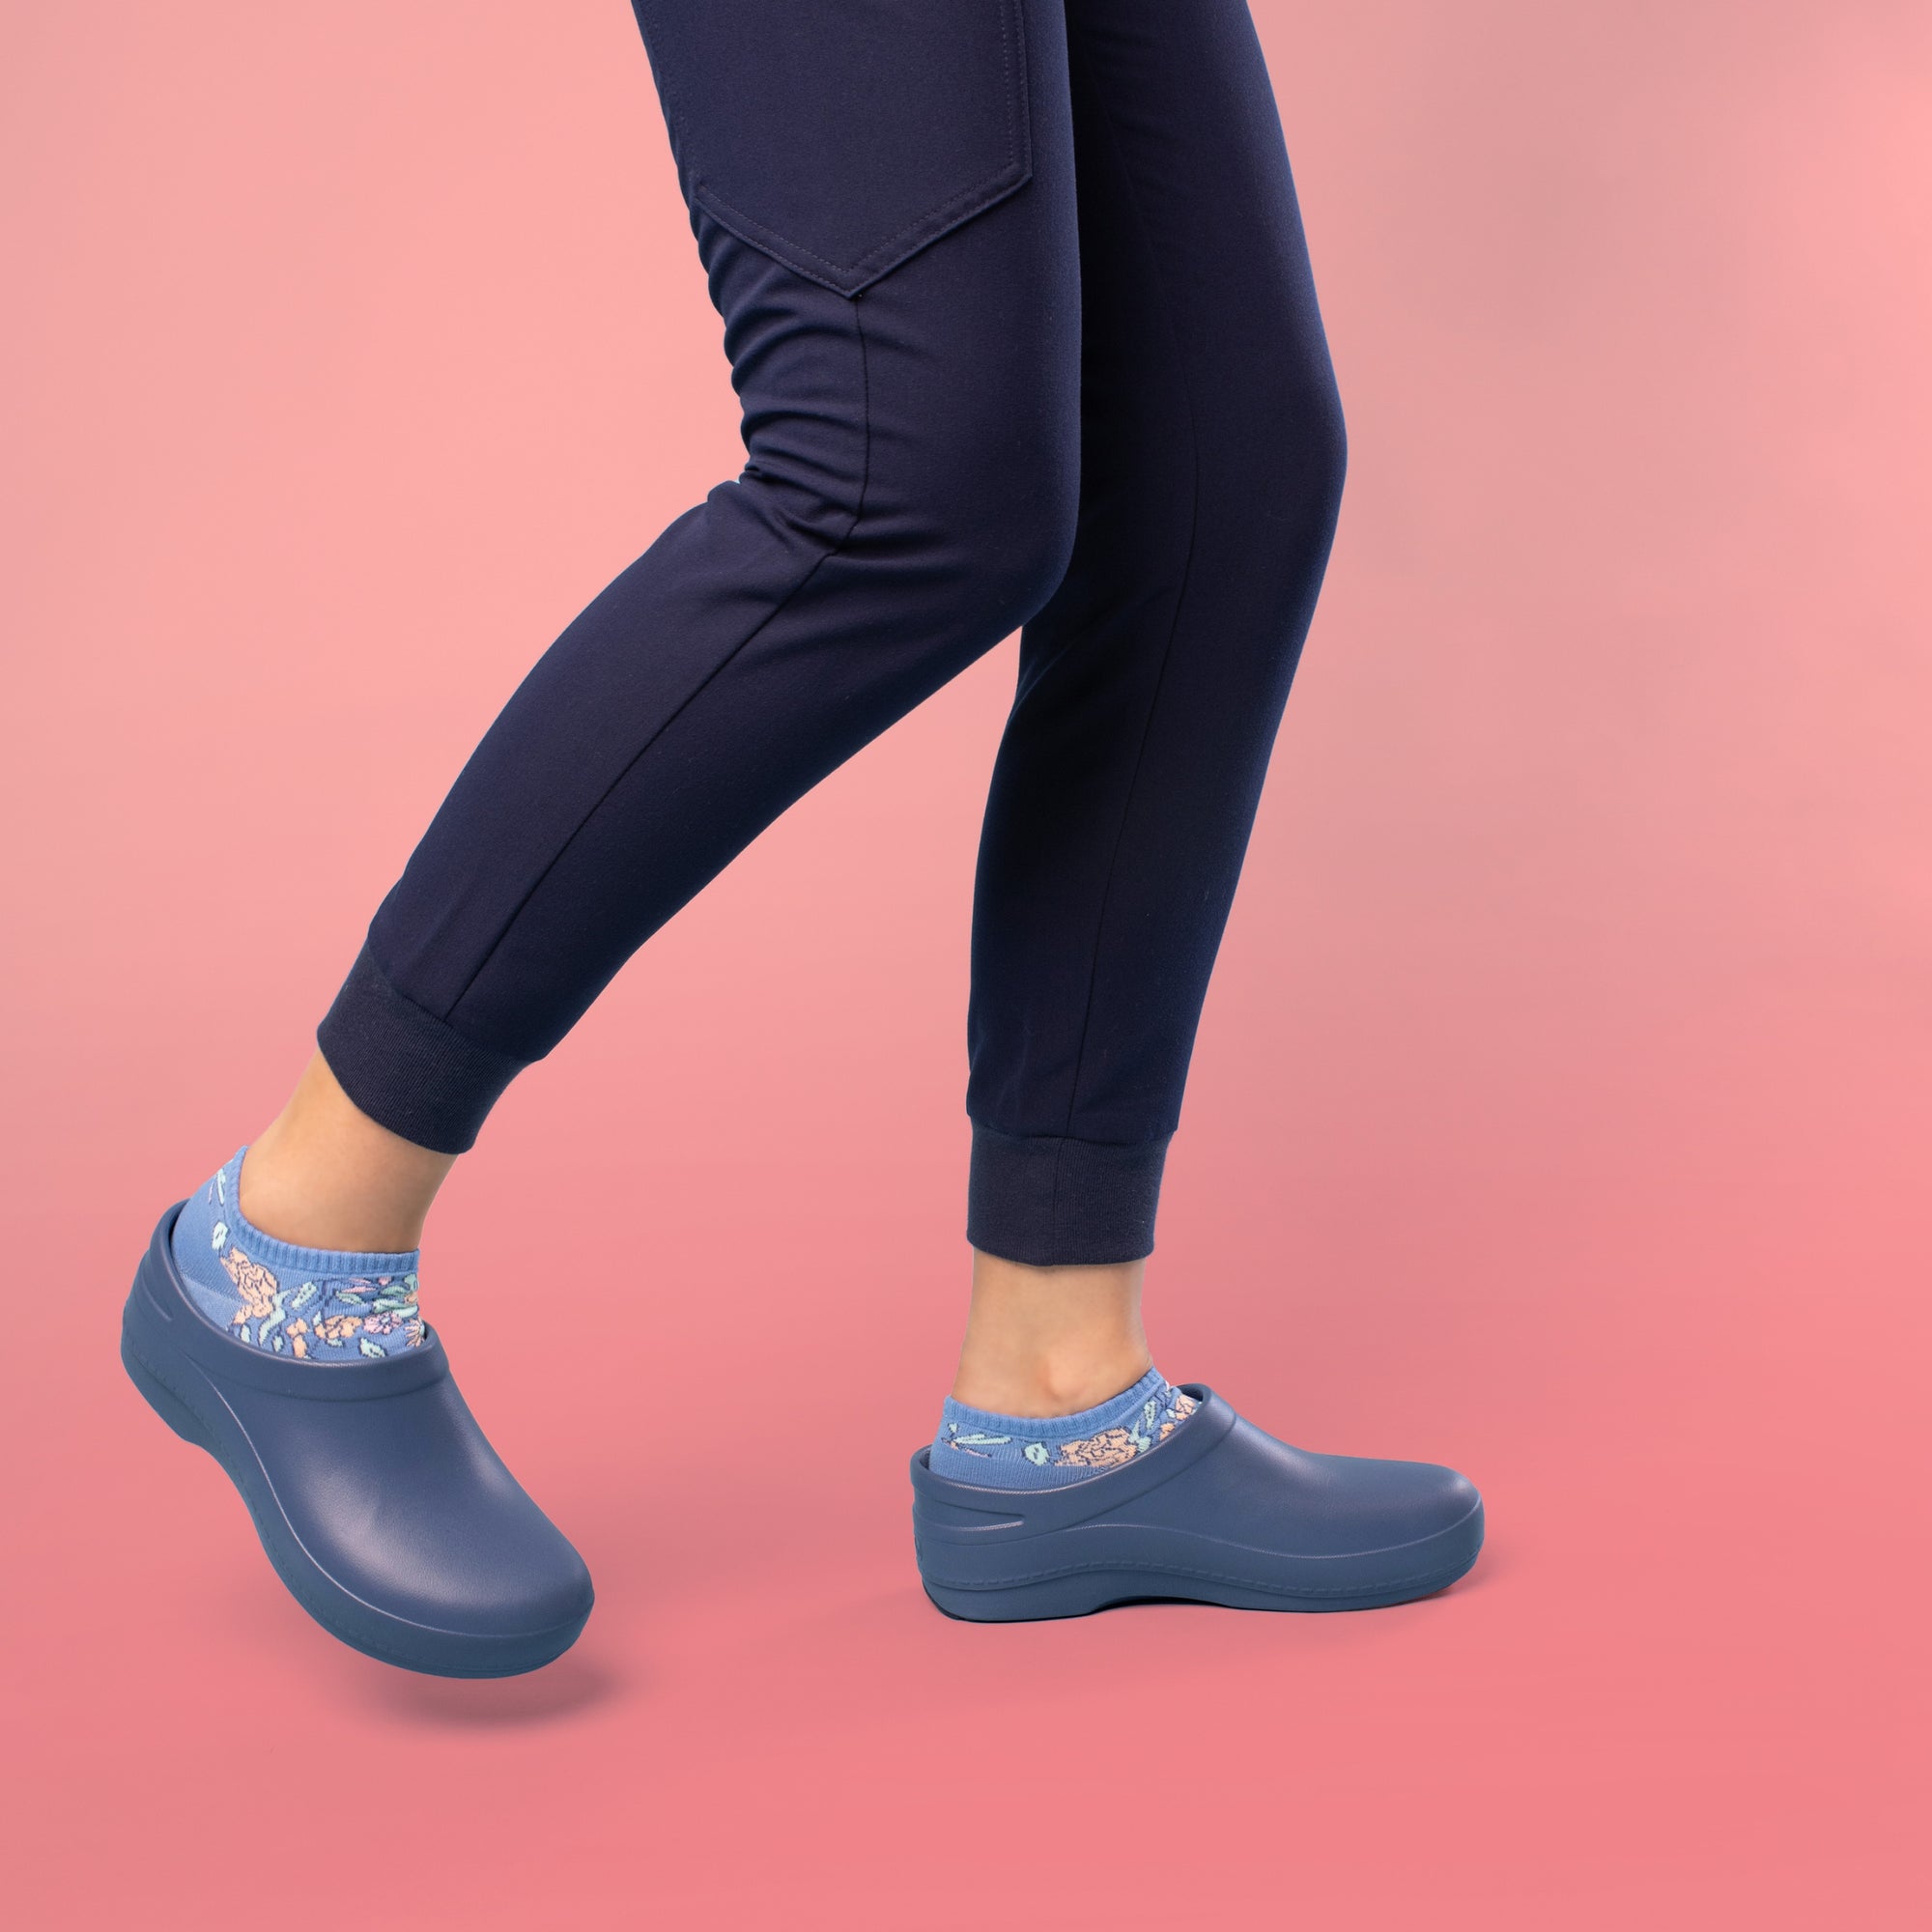 Keep your footing for your whole shift thanks to the patented slip-resistance of our molded occupational clog, Kaci.